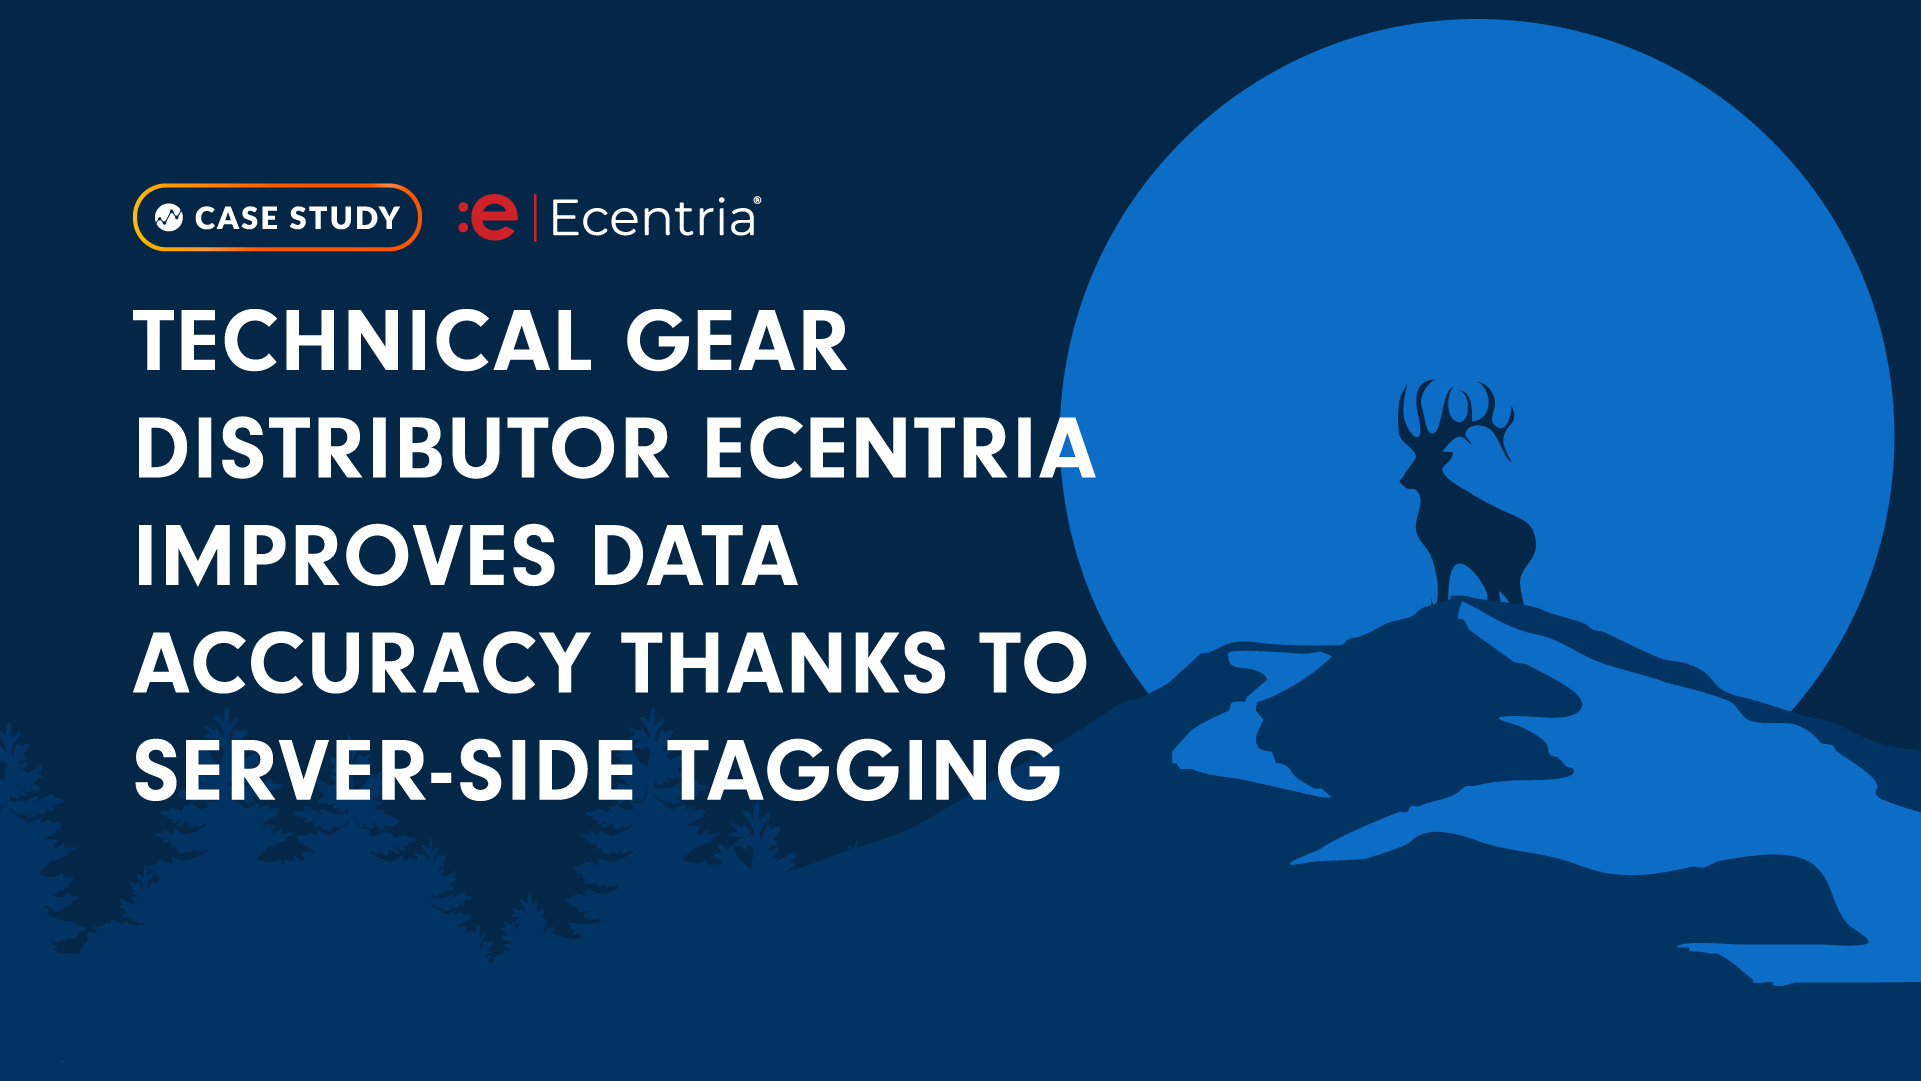 Technical Gear Distributor Ecentria Improves Data Accuracy Thanks to Server-Side Tagging